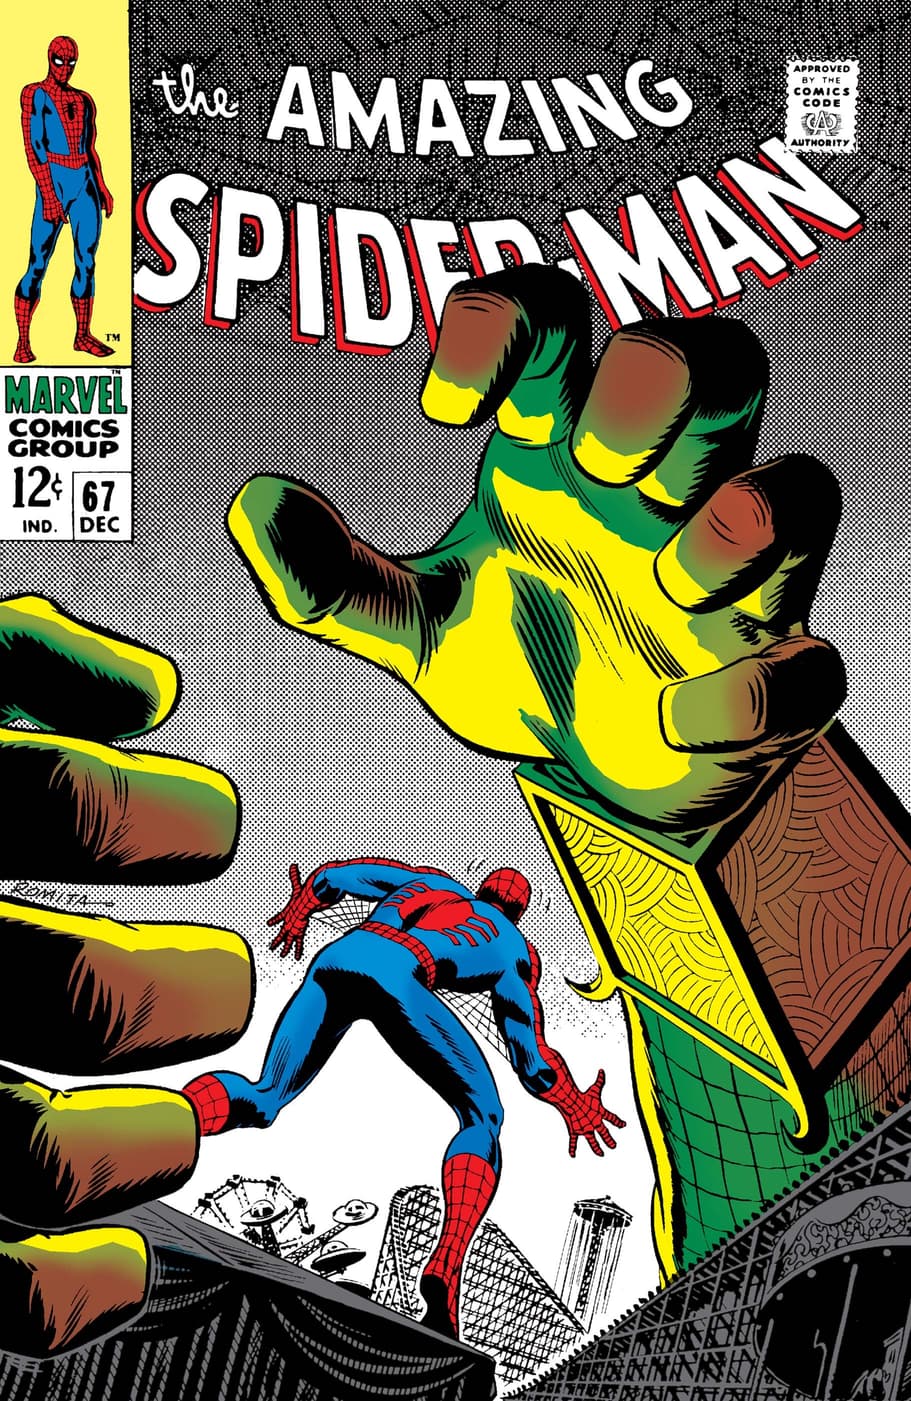 Cover to THE AMAZING SPIDER-MAN (1963) #67 by Romita Sr. 